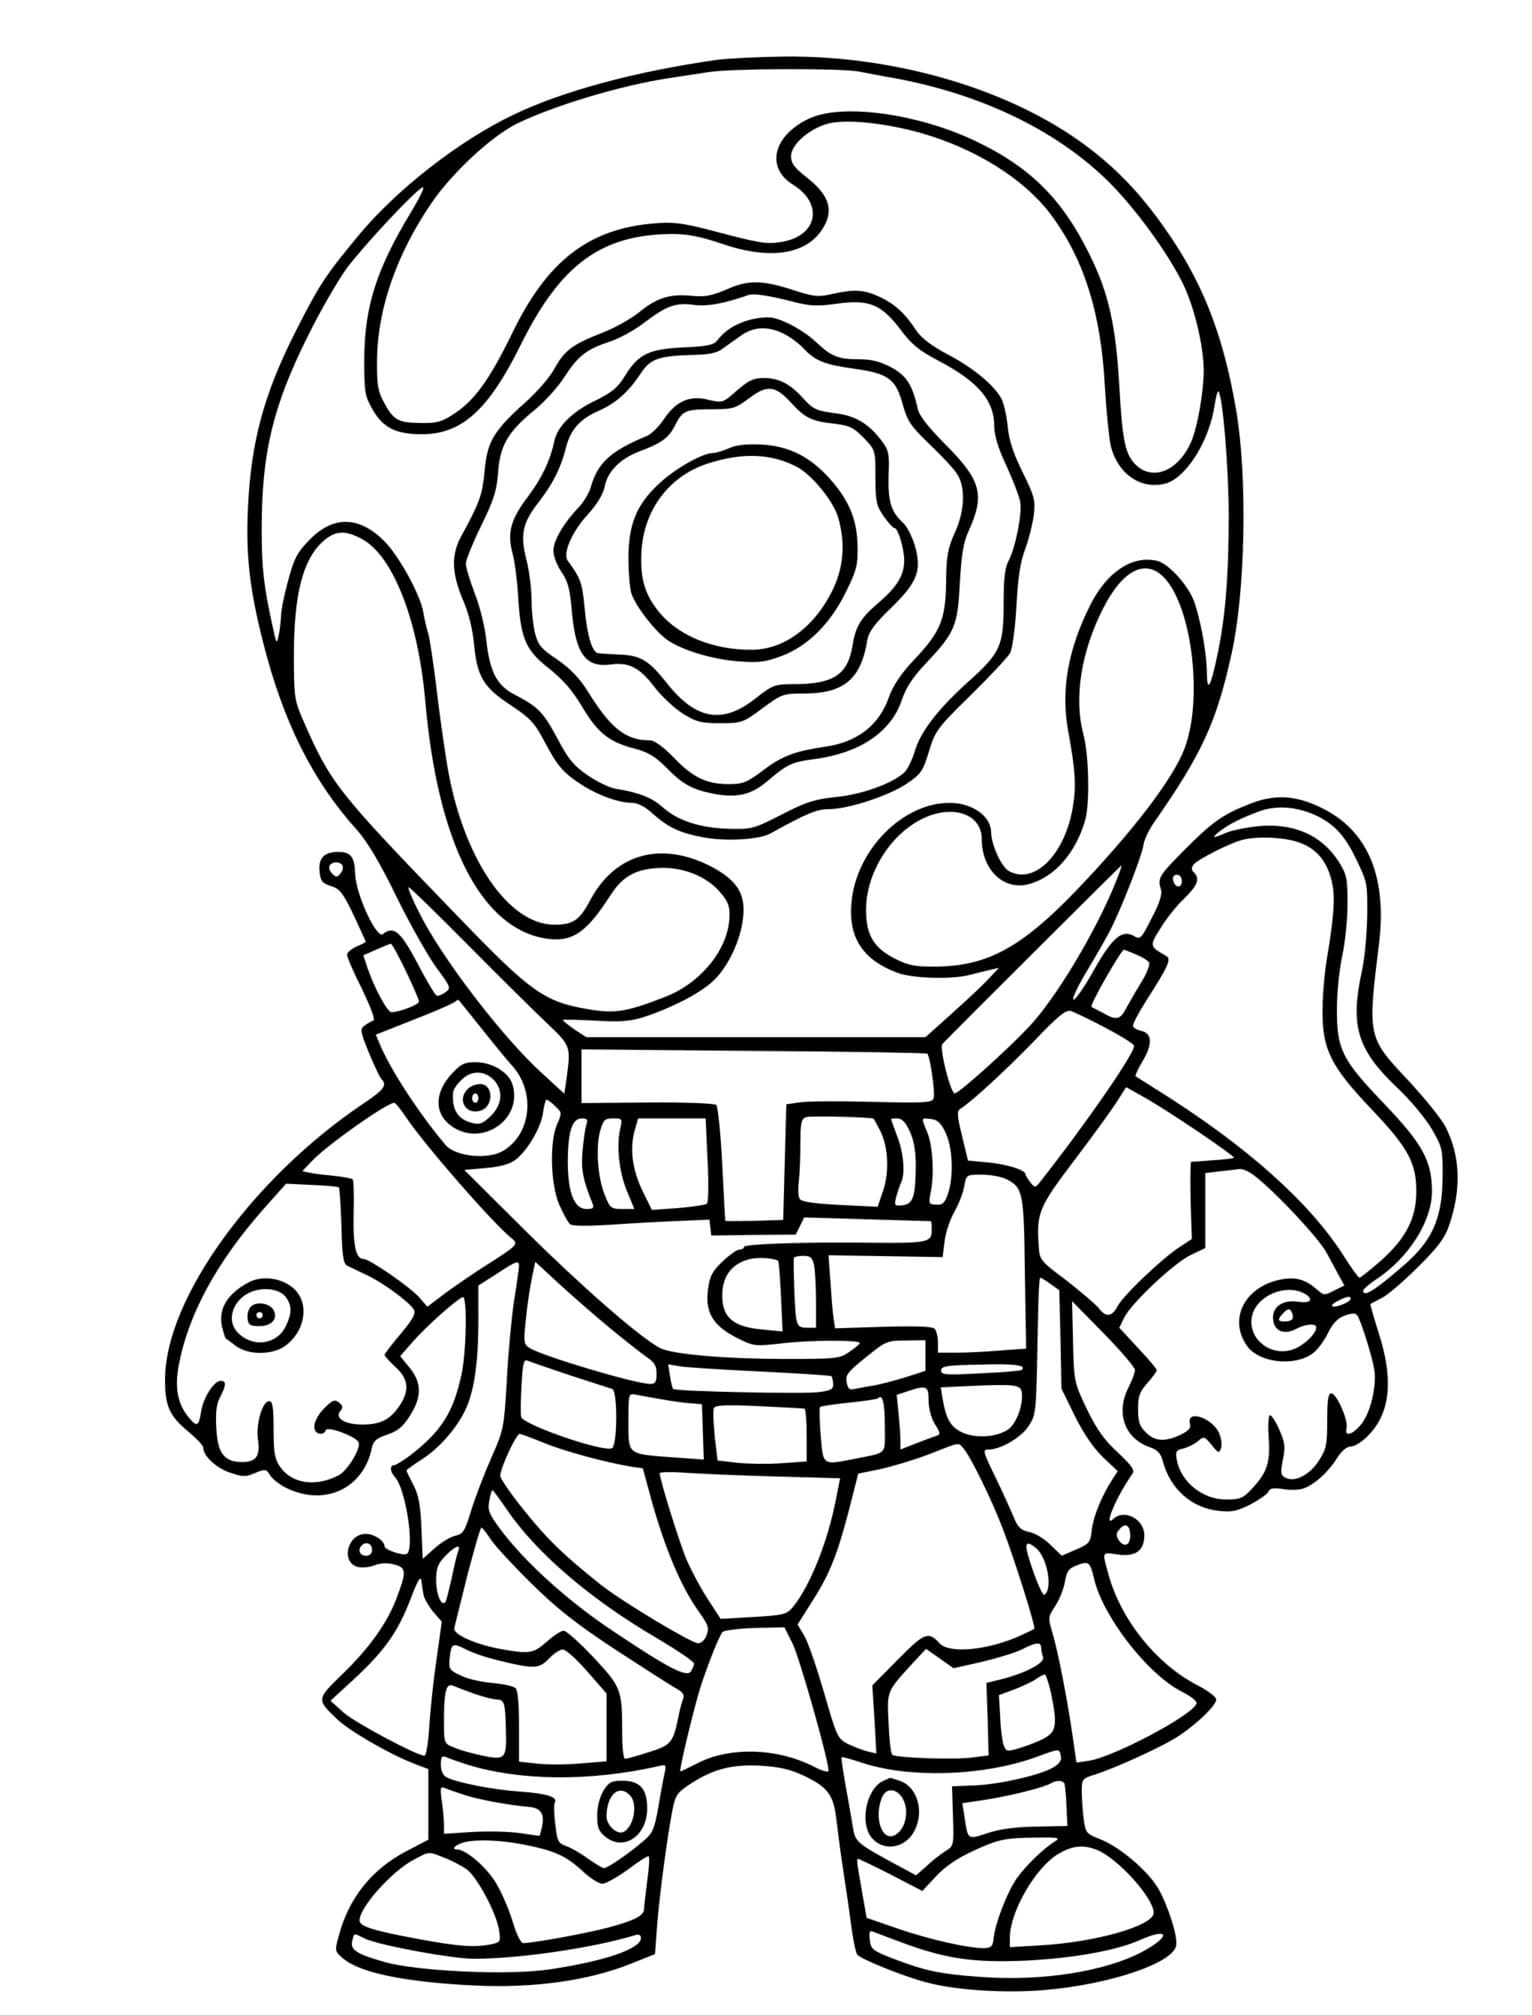 Cyclo Skin Fortnite Coloring Page